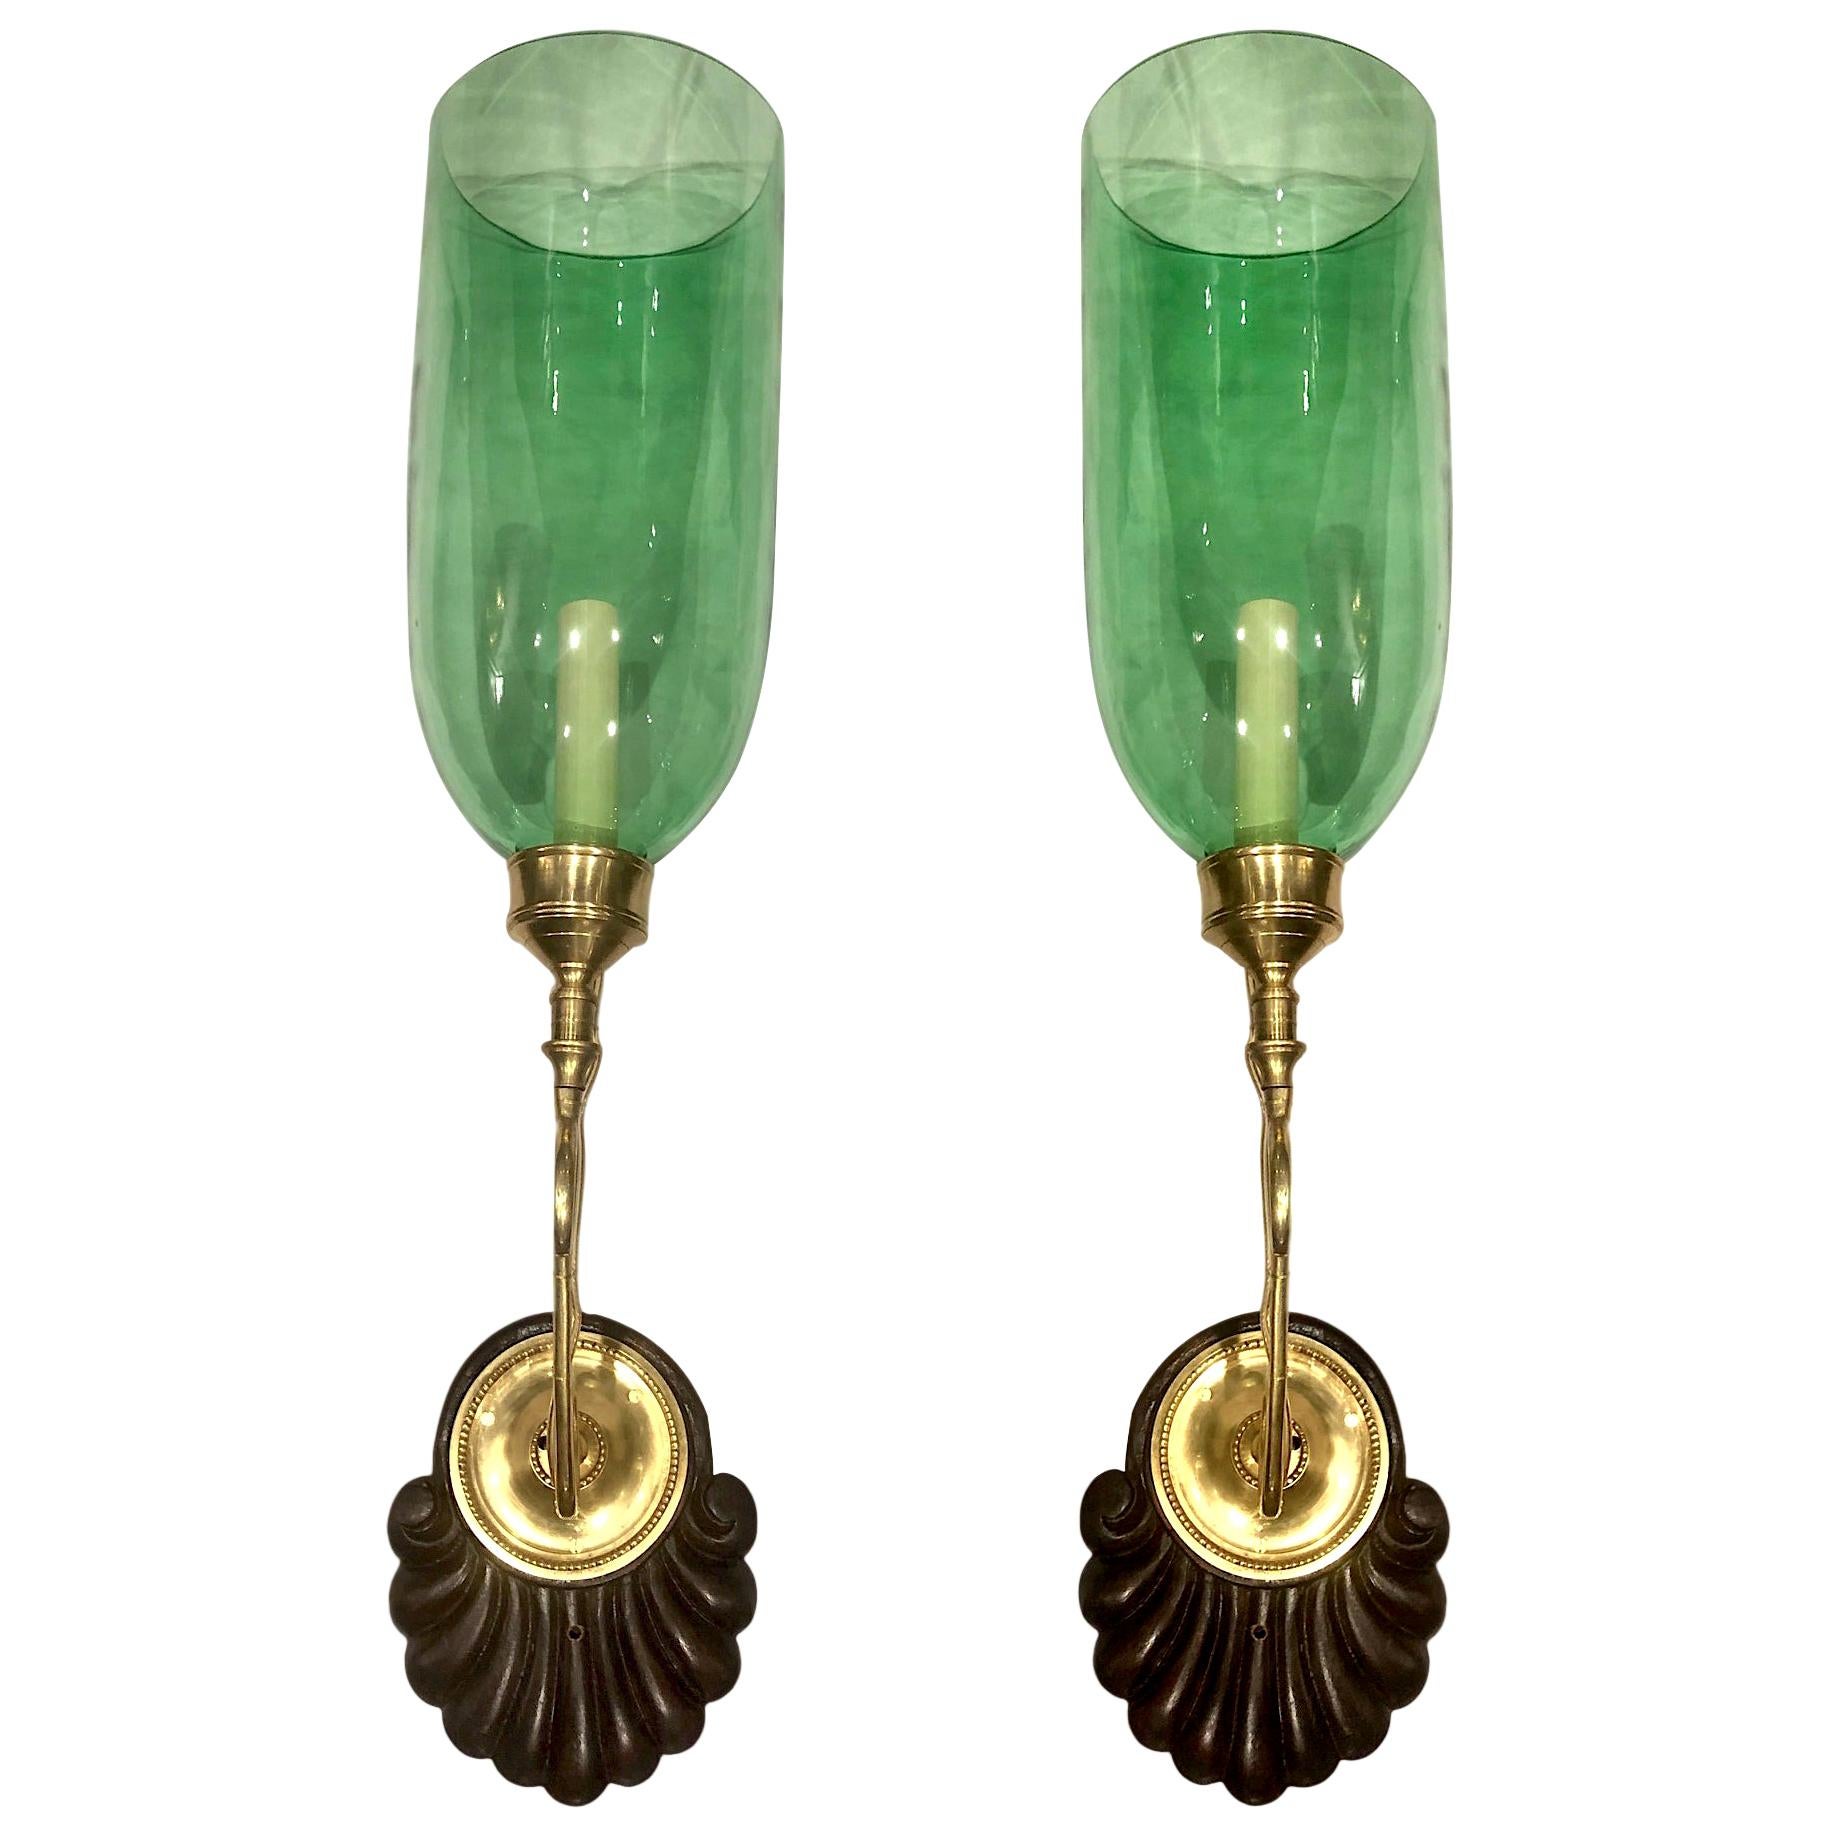 Set of Sconces with Emerald Green Glass Hurricanes, Sold in Pairs